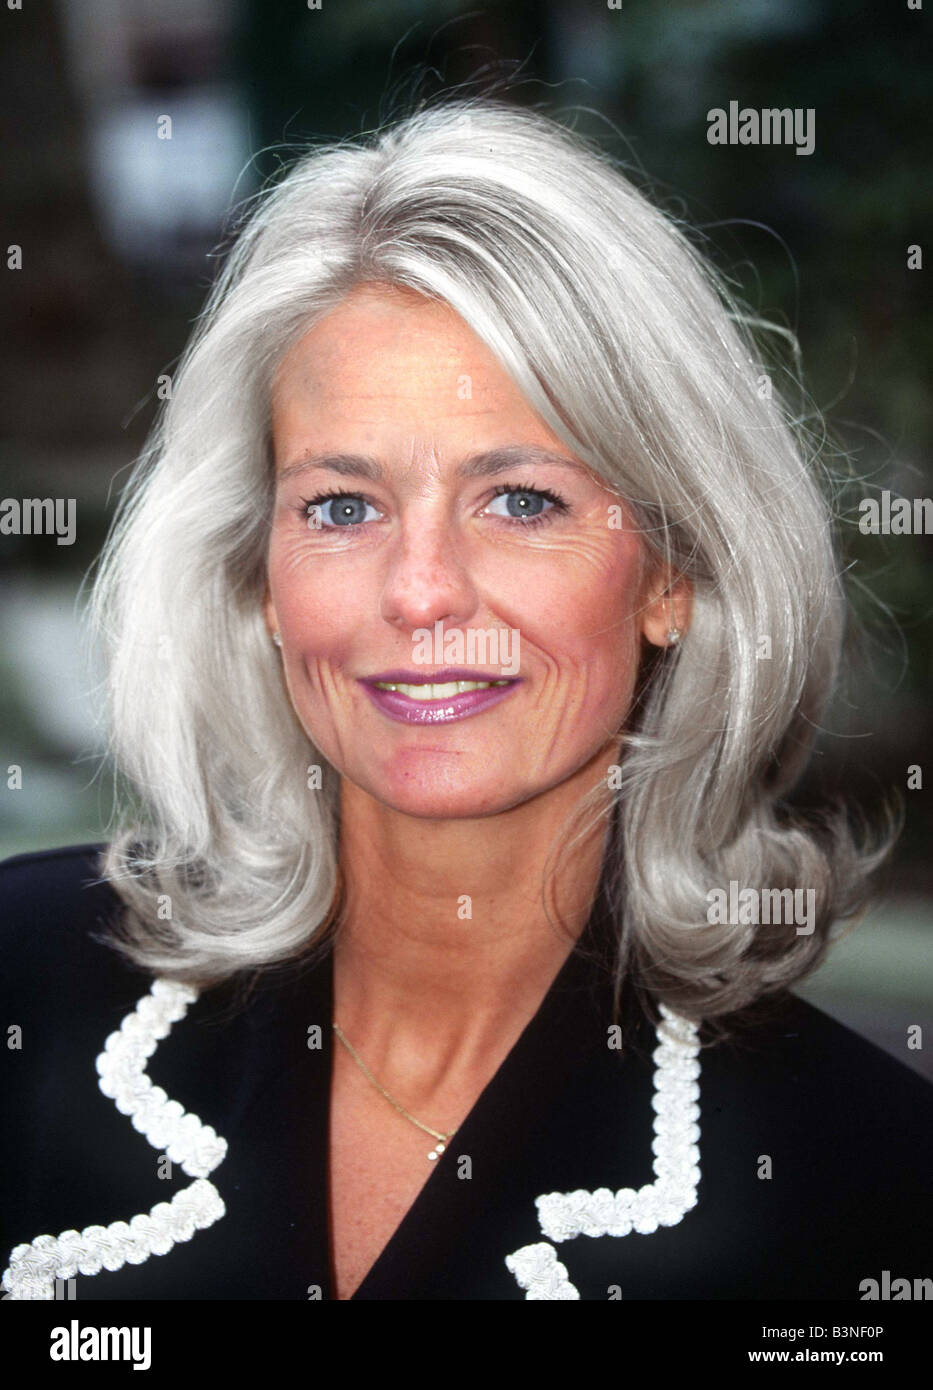 Ulrika Jonsson TV Presenter aged by 34 years January 1998 by computer as part of the Direct Line Insurance advertising campaign Stock Photo